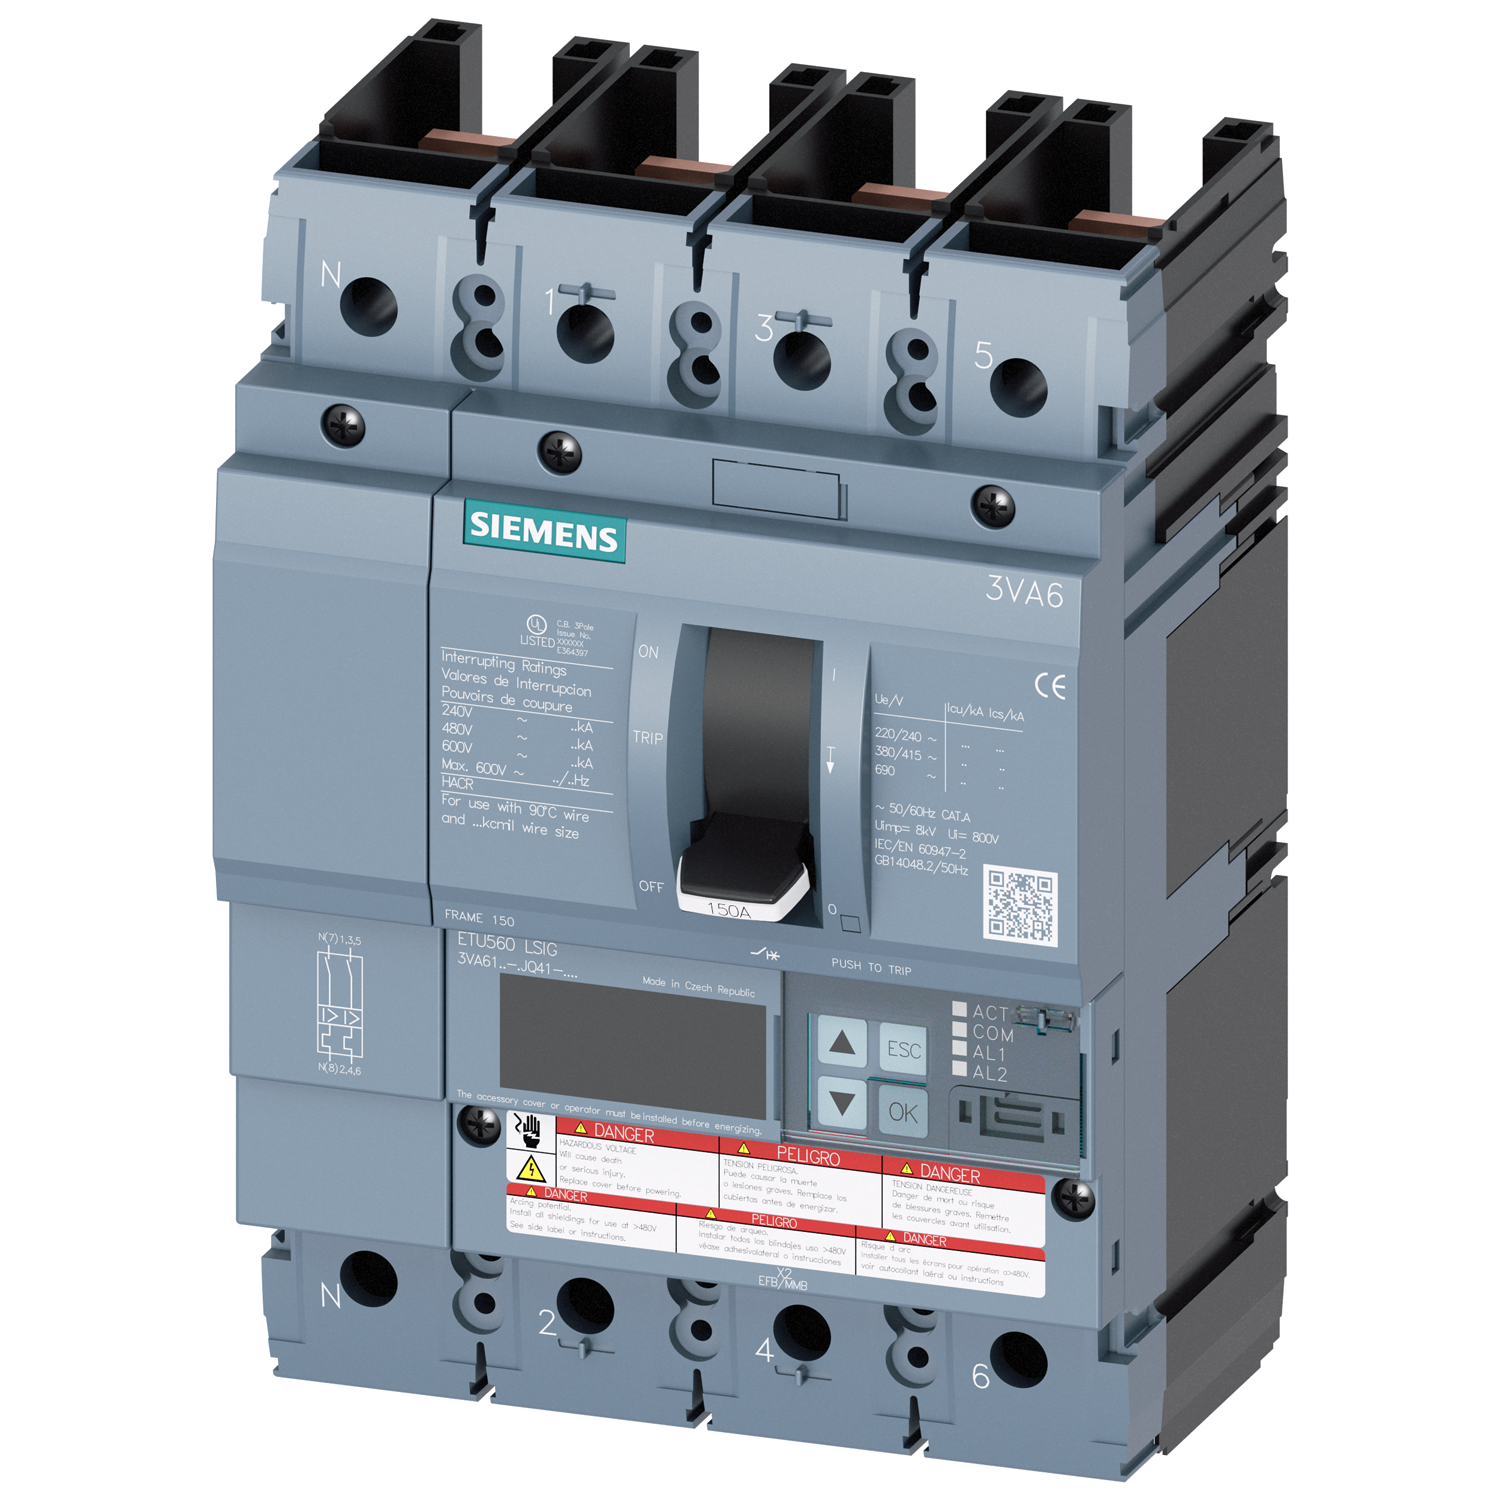 SIEMENS LOW VOLTAGE 3VA UL MOLDED CASE CIRCUIT BREAKER WITH ELECTRONIC TRIP UNIT. 3VA61 FRAME WITH HIGH (CLASS H) BREAKING CAPACITY. 100A 4-POLE (22KAIC AT 600V) (65KAIC AT 480V). ETU560 TRIP UNIT LCD LSIG. SPECIAL FEATURES WITHOUT LUGS 100 PERCENT RATED. DIMENSIONS (W x H x D) IN 5.5 x 7.8 x 4.2.